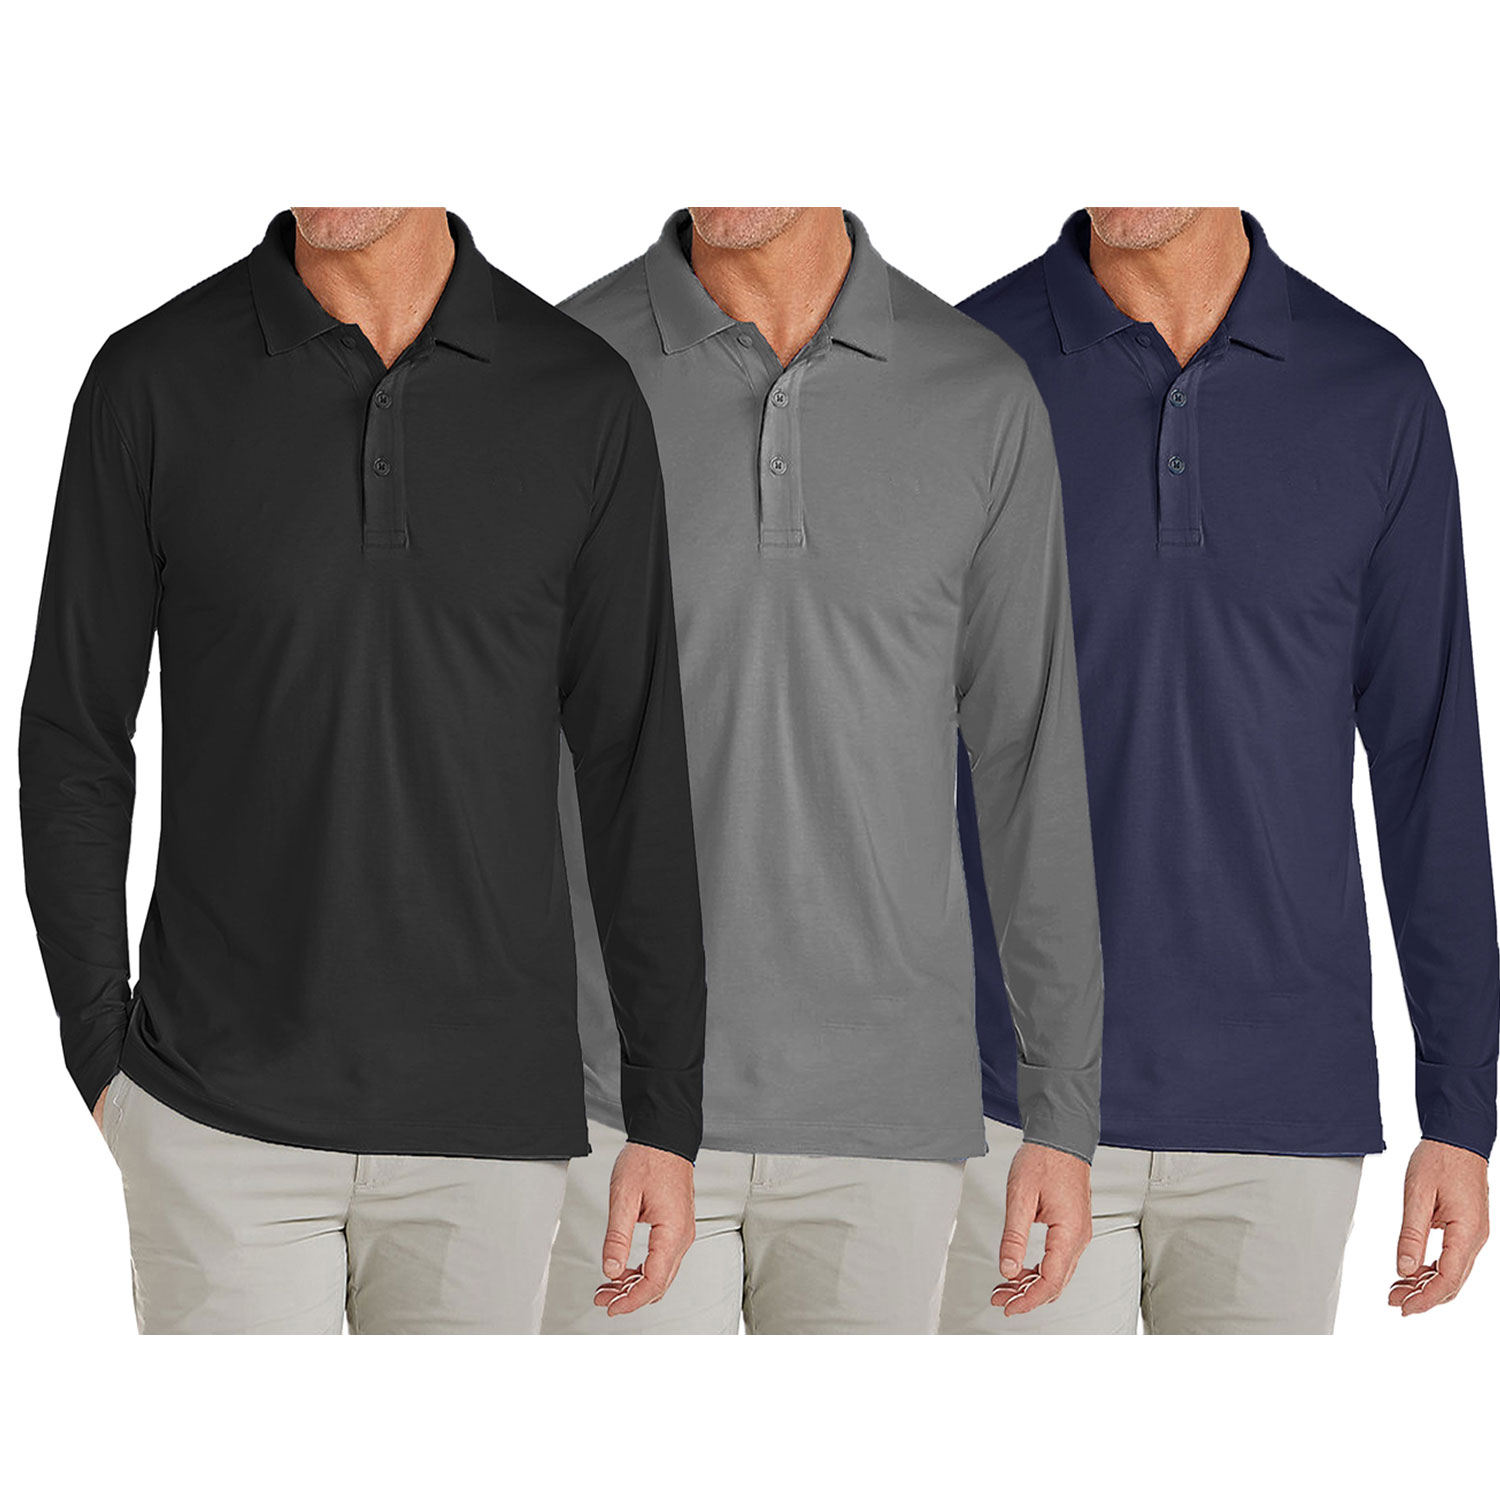 3 Pack Men's Long Sleeve Pique Polo Shirts